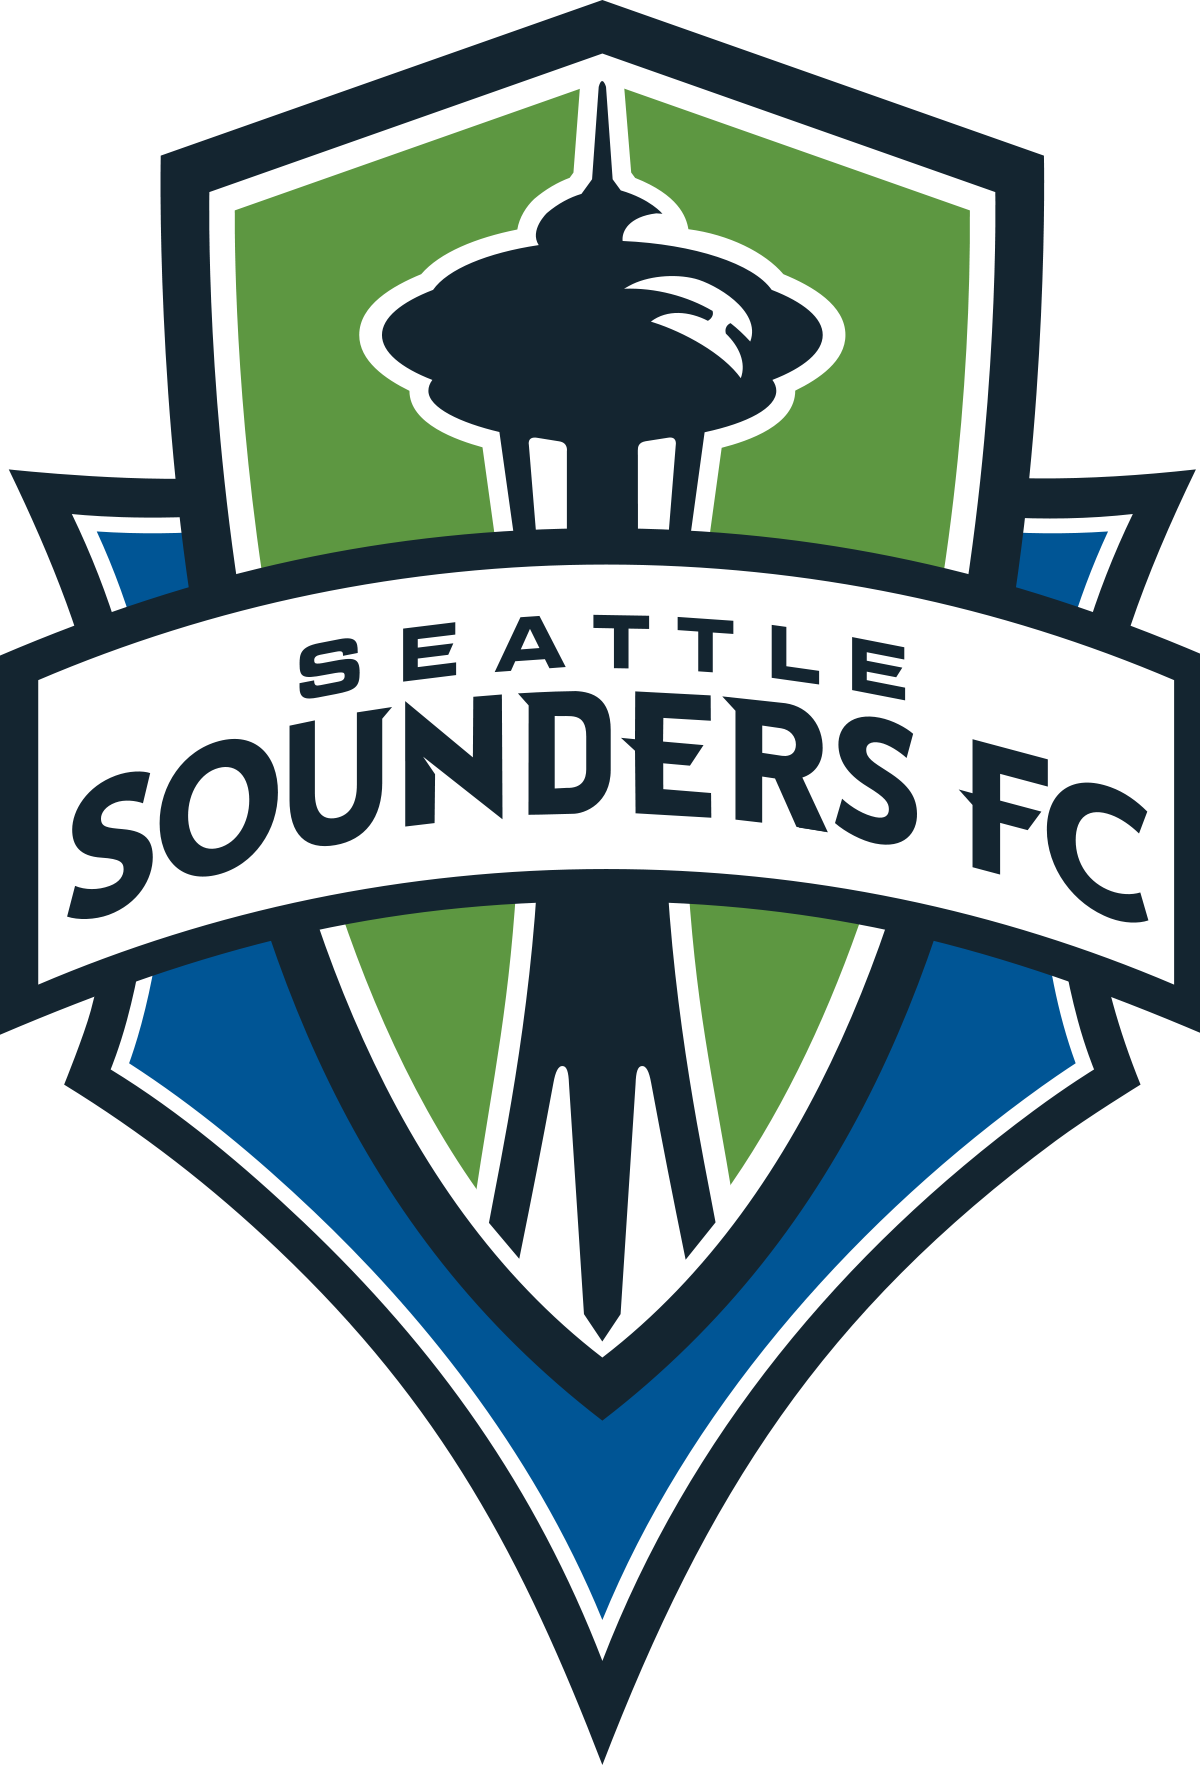 Seattle Sounders Fc Png Hdpng.com 1200 - Seattle Sounders Fc, Transparent background PNG HD thumbnail